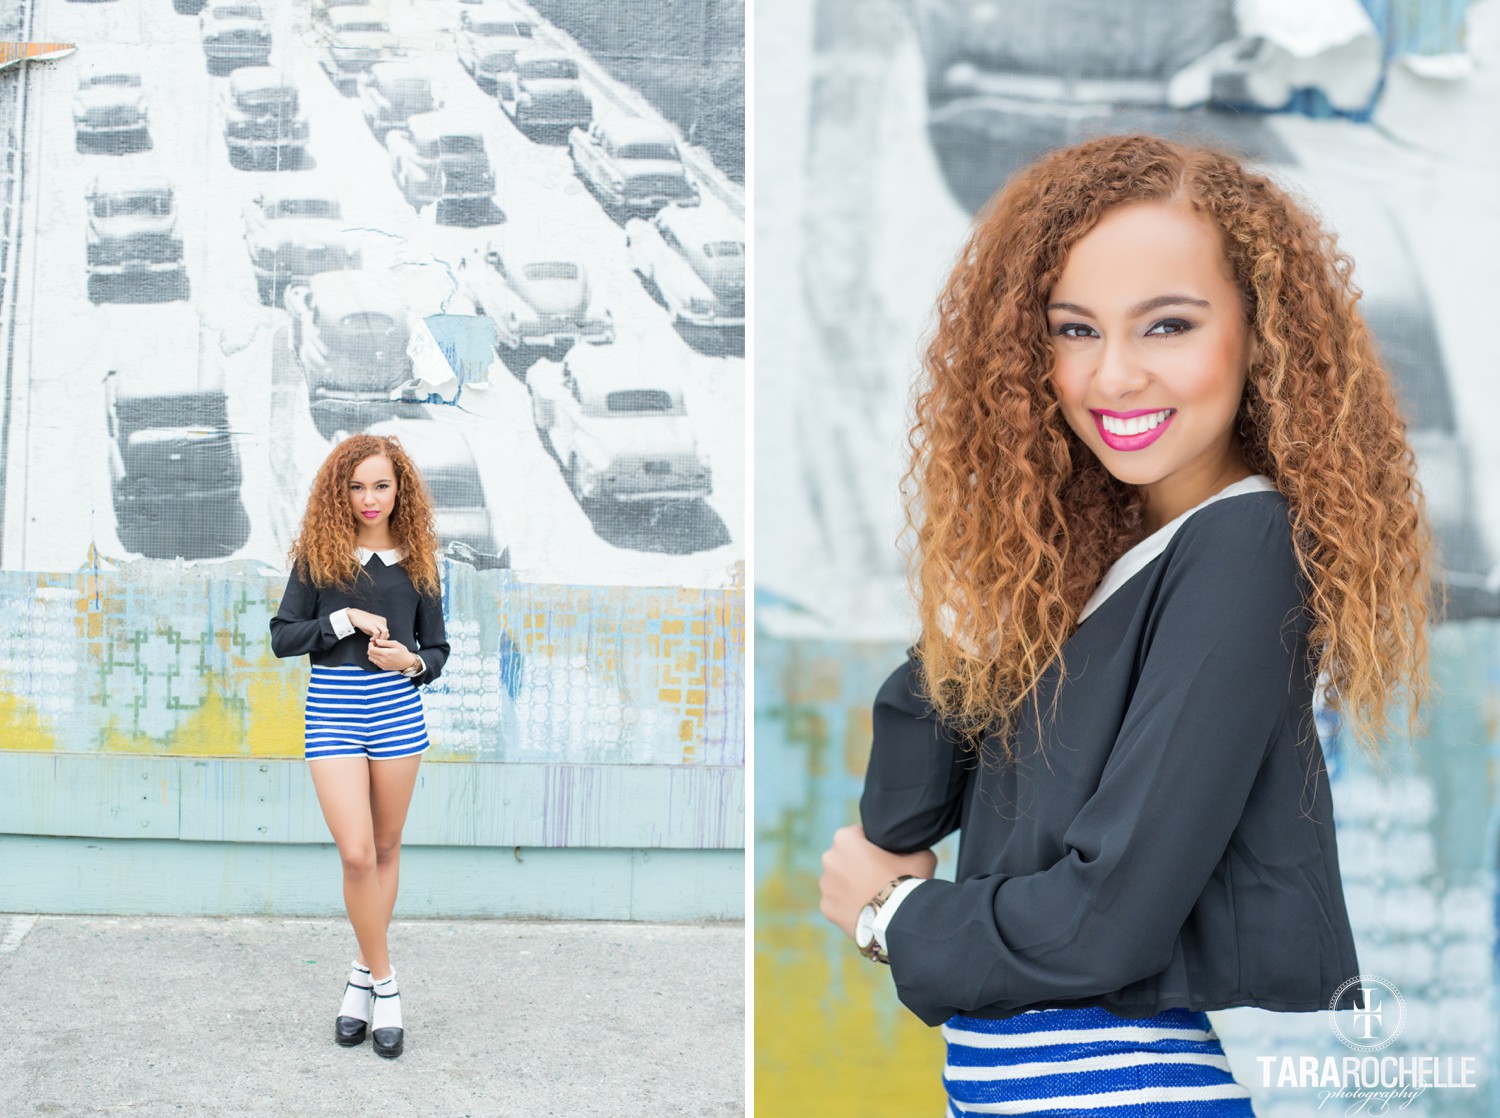 Clueless inspired senior pictures in Hollywood, California